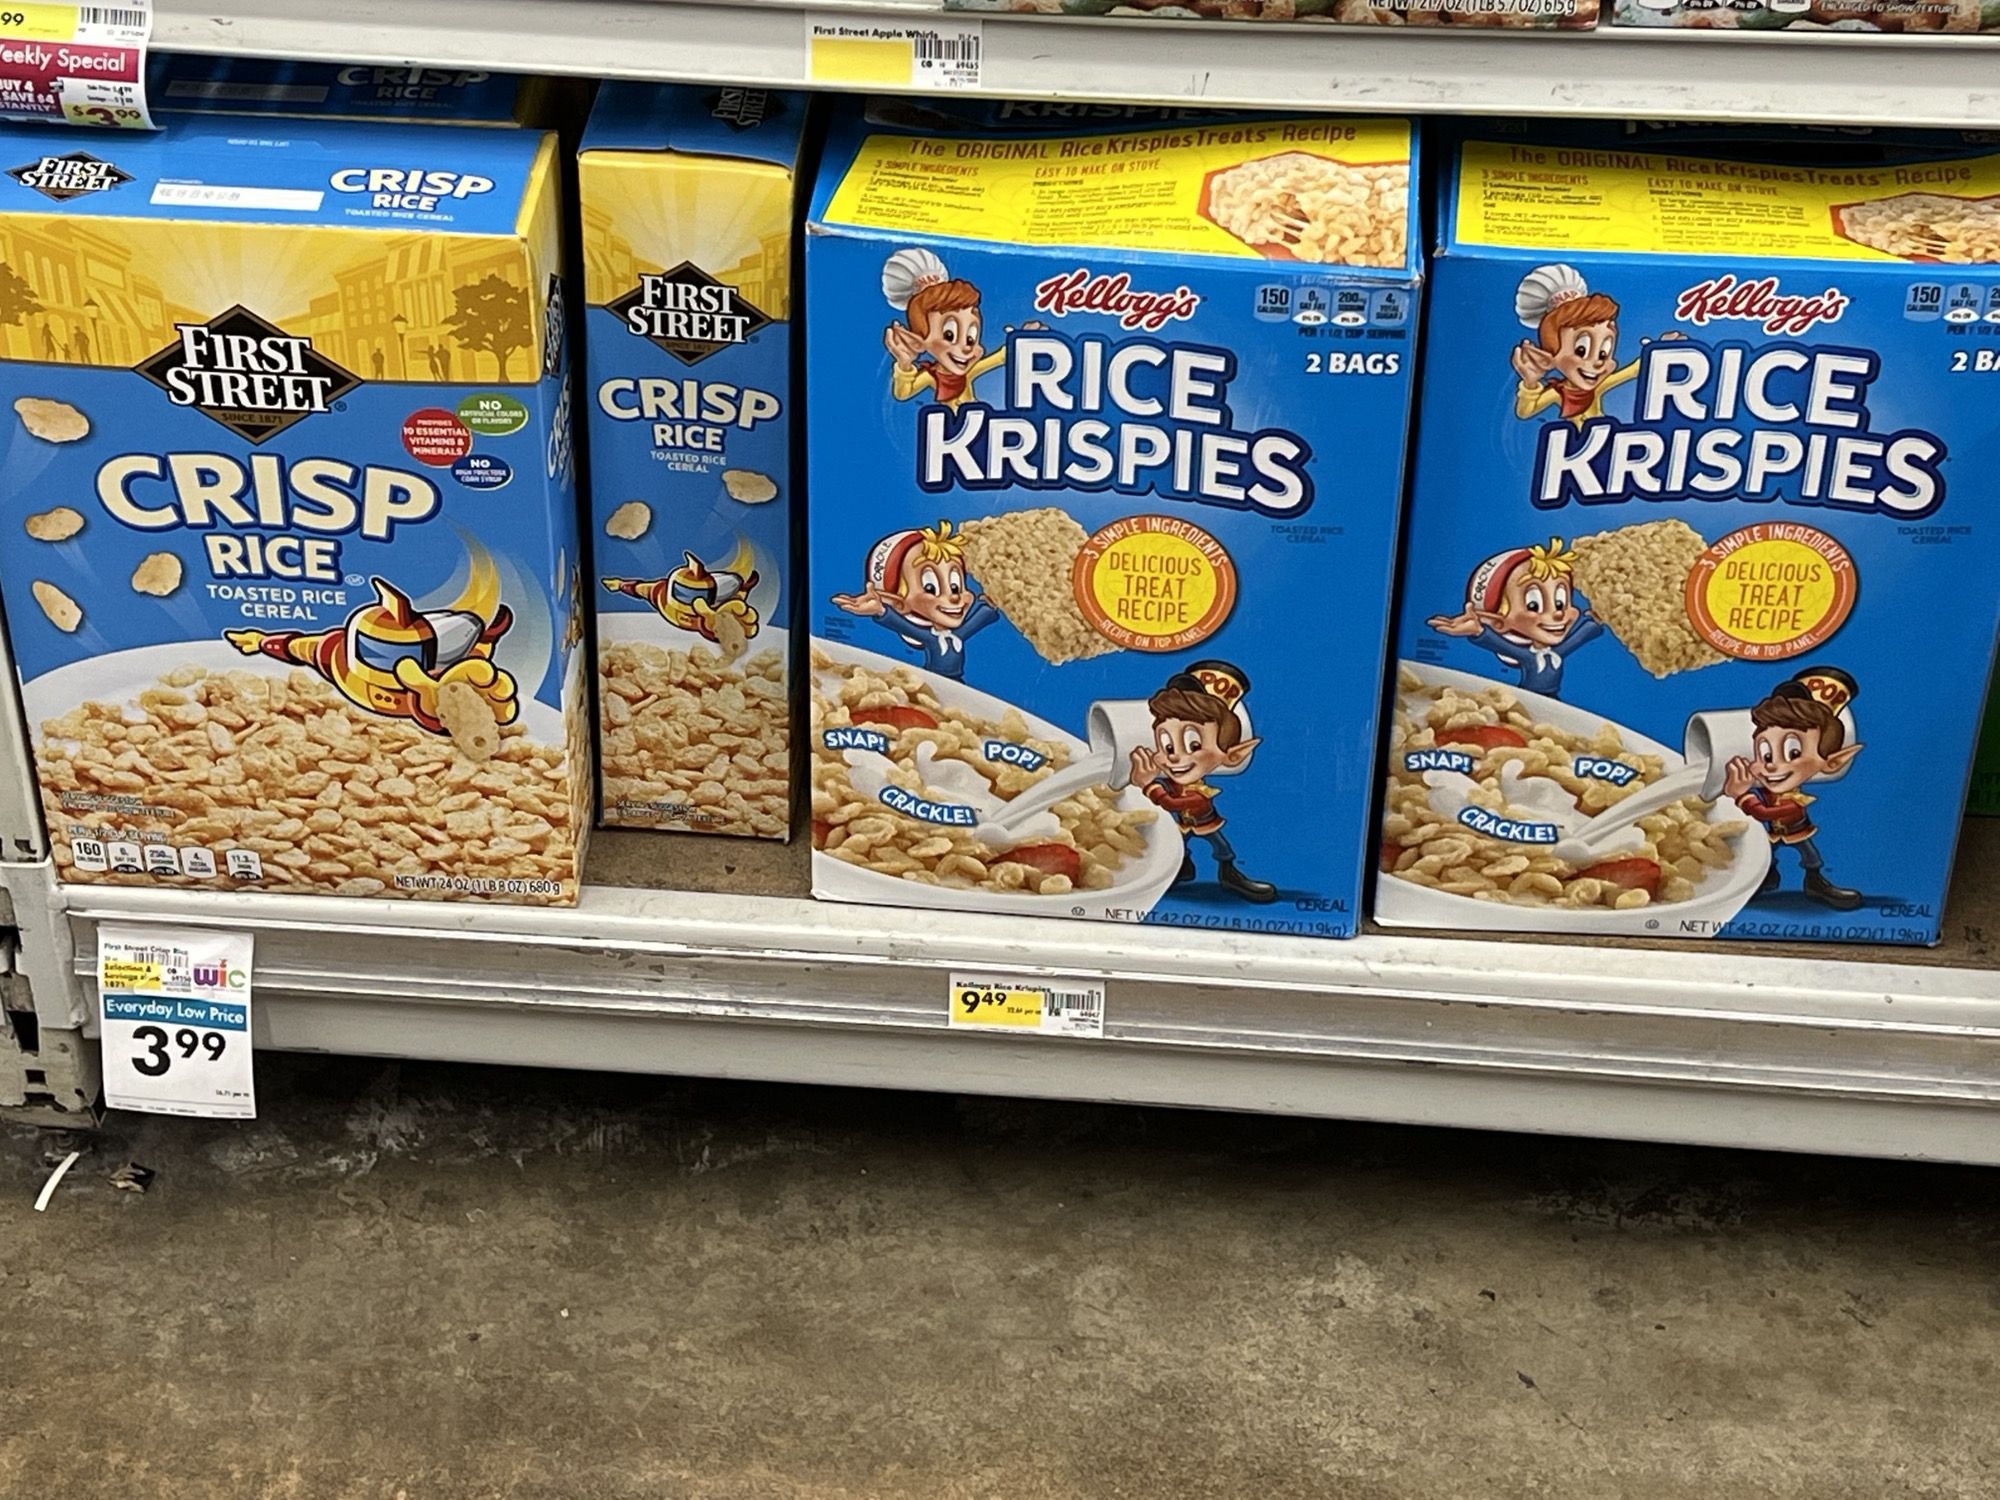 My girlfriend asked me if I was alright with “Crisp Rice”